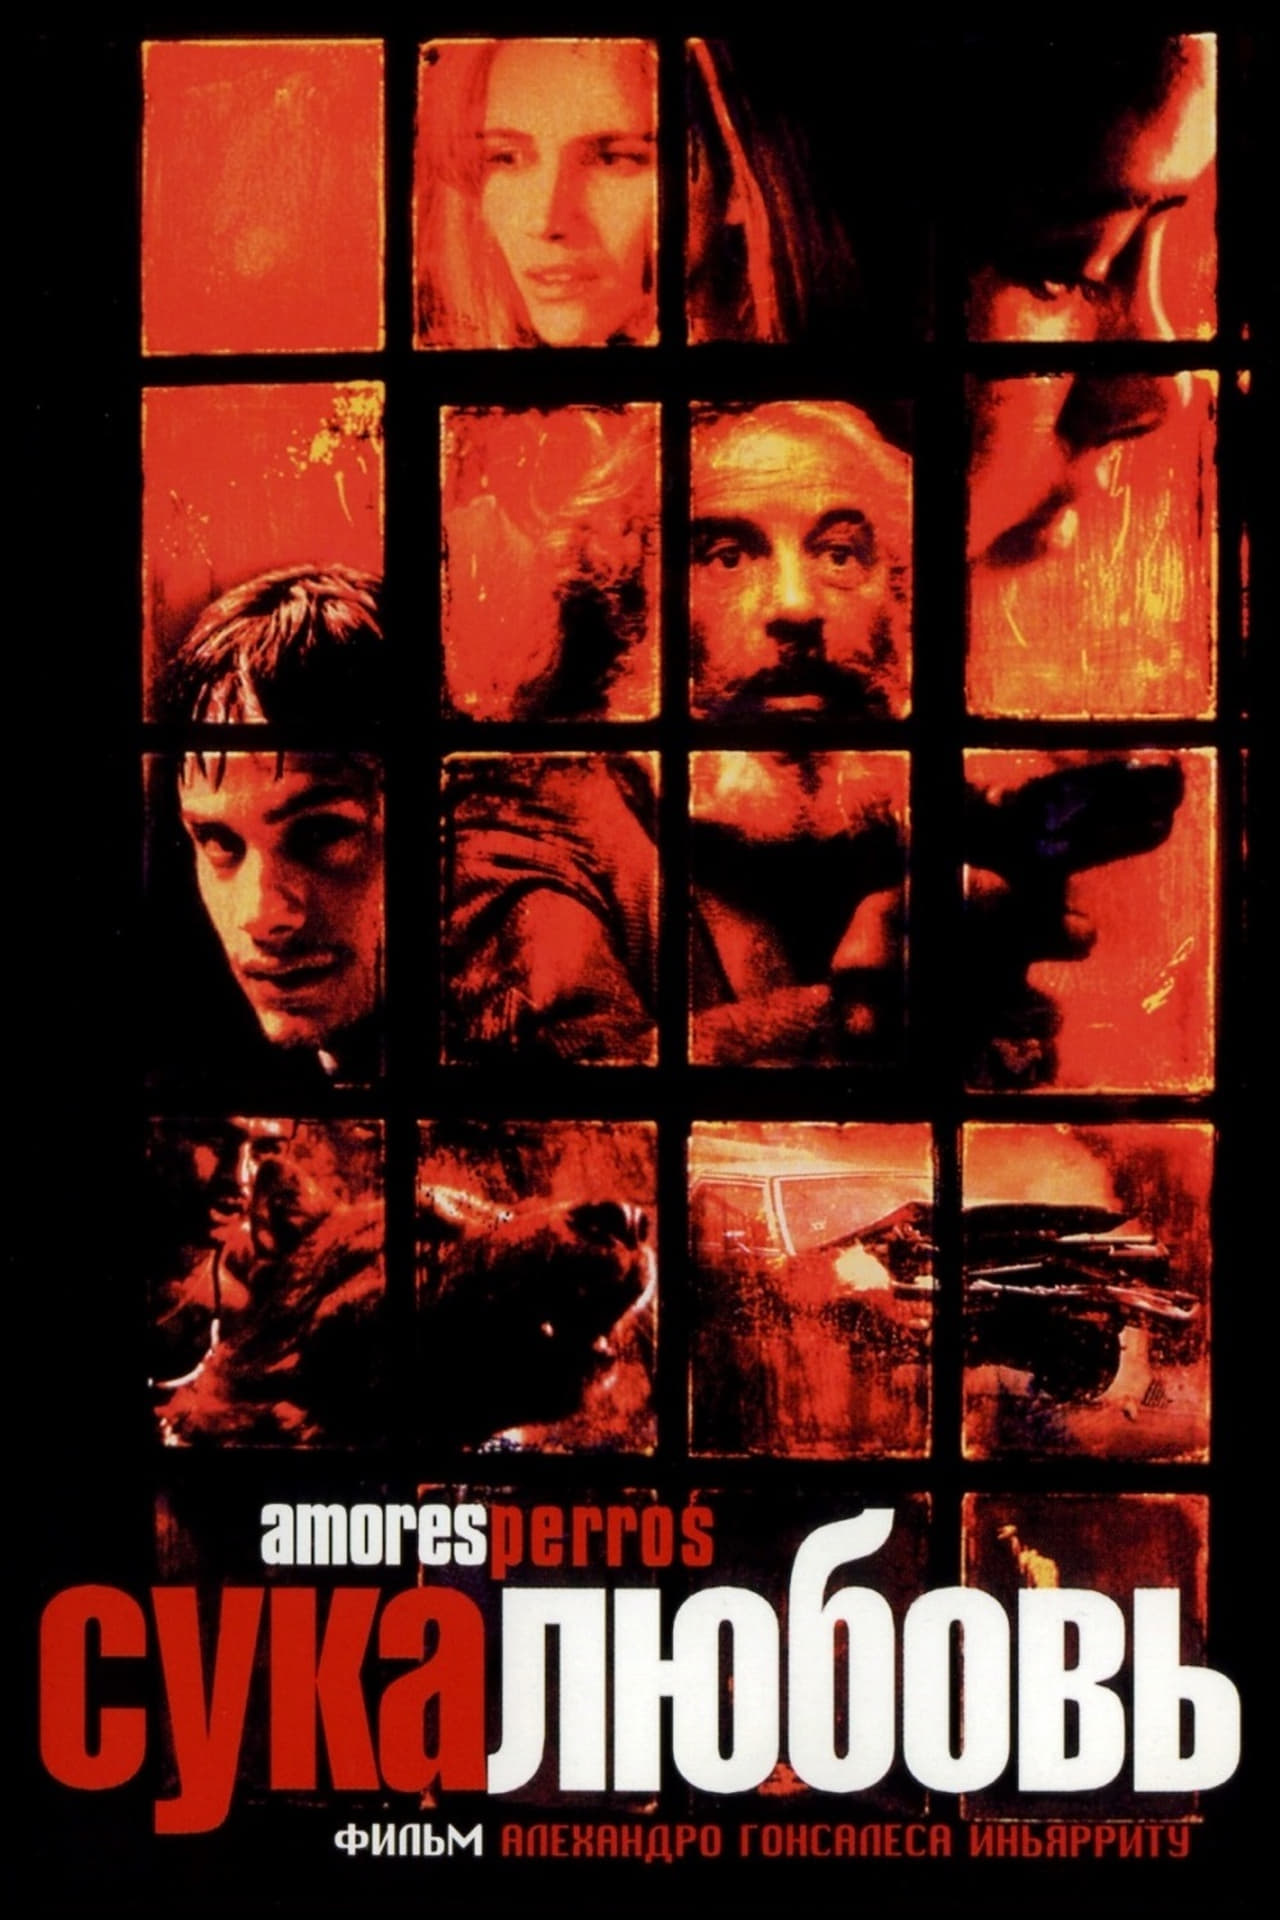 amores perros wiki